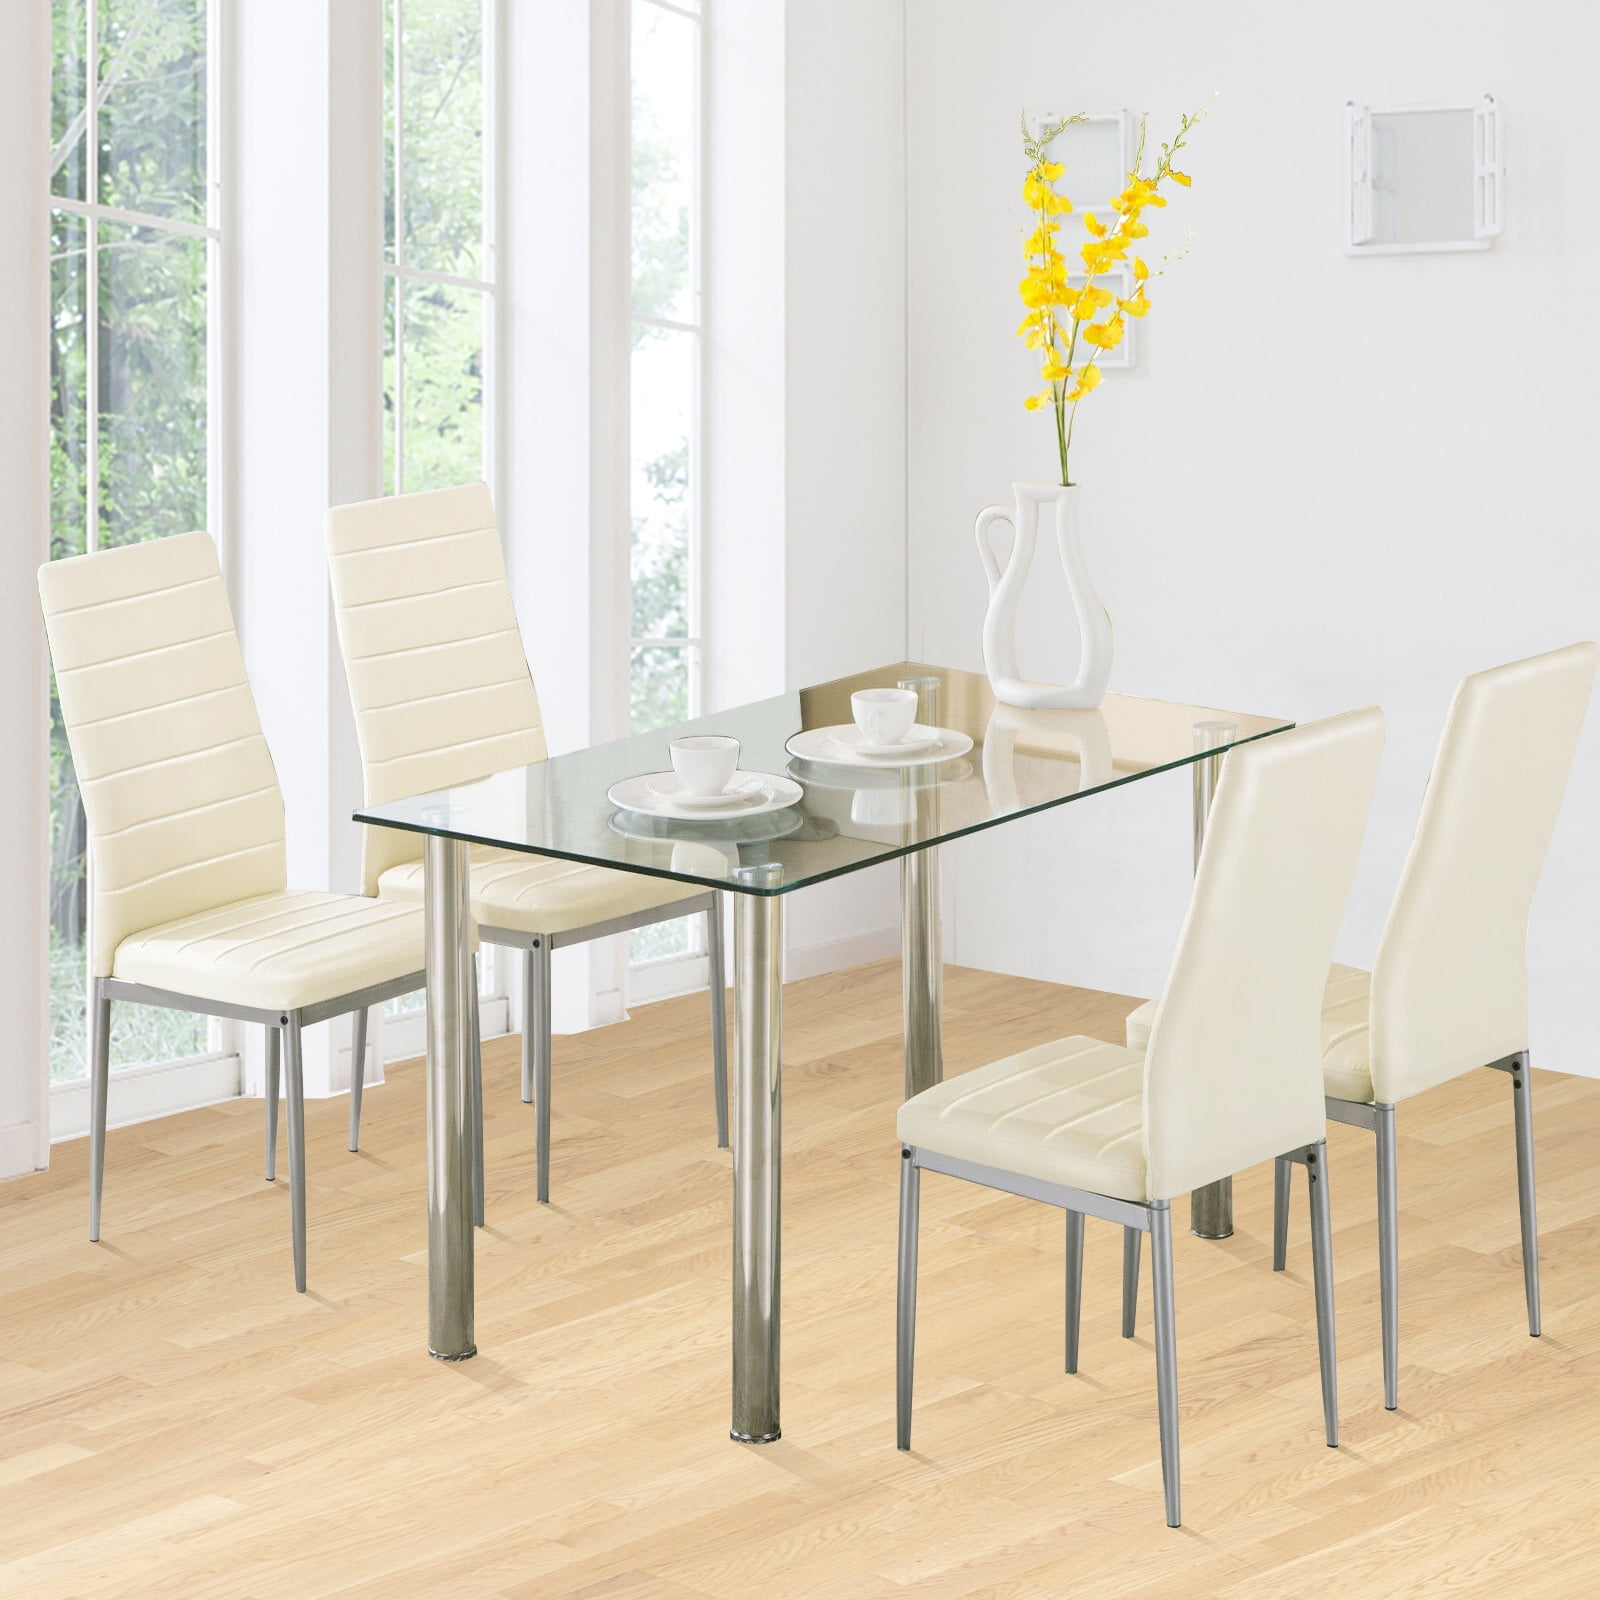 Mecor 5 Piece Dining Table Set Tempered, Light Wood Dining Room Table And Chairs